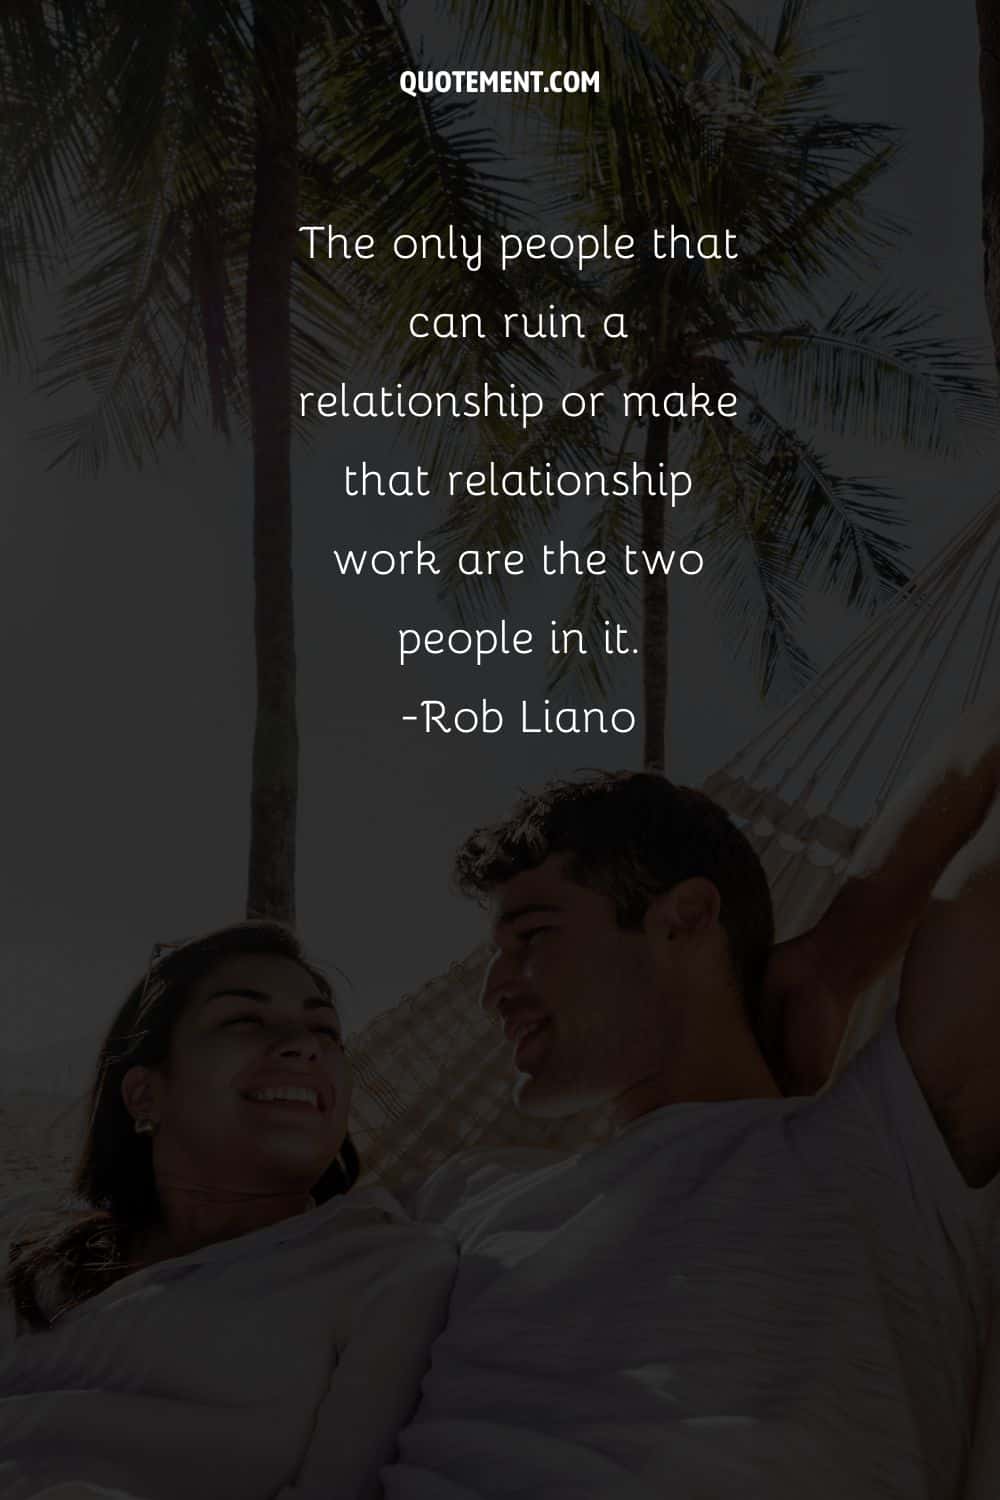 The only people that can ruin a relationship or make that relationship work are the two people in it